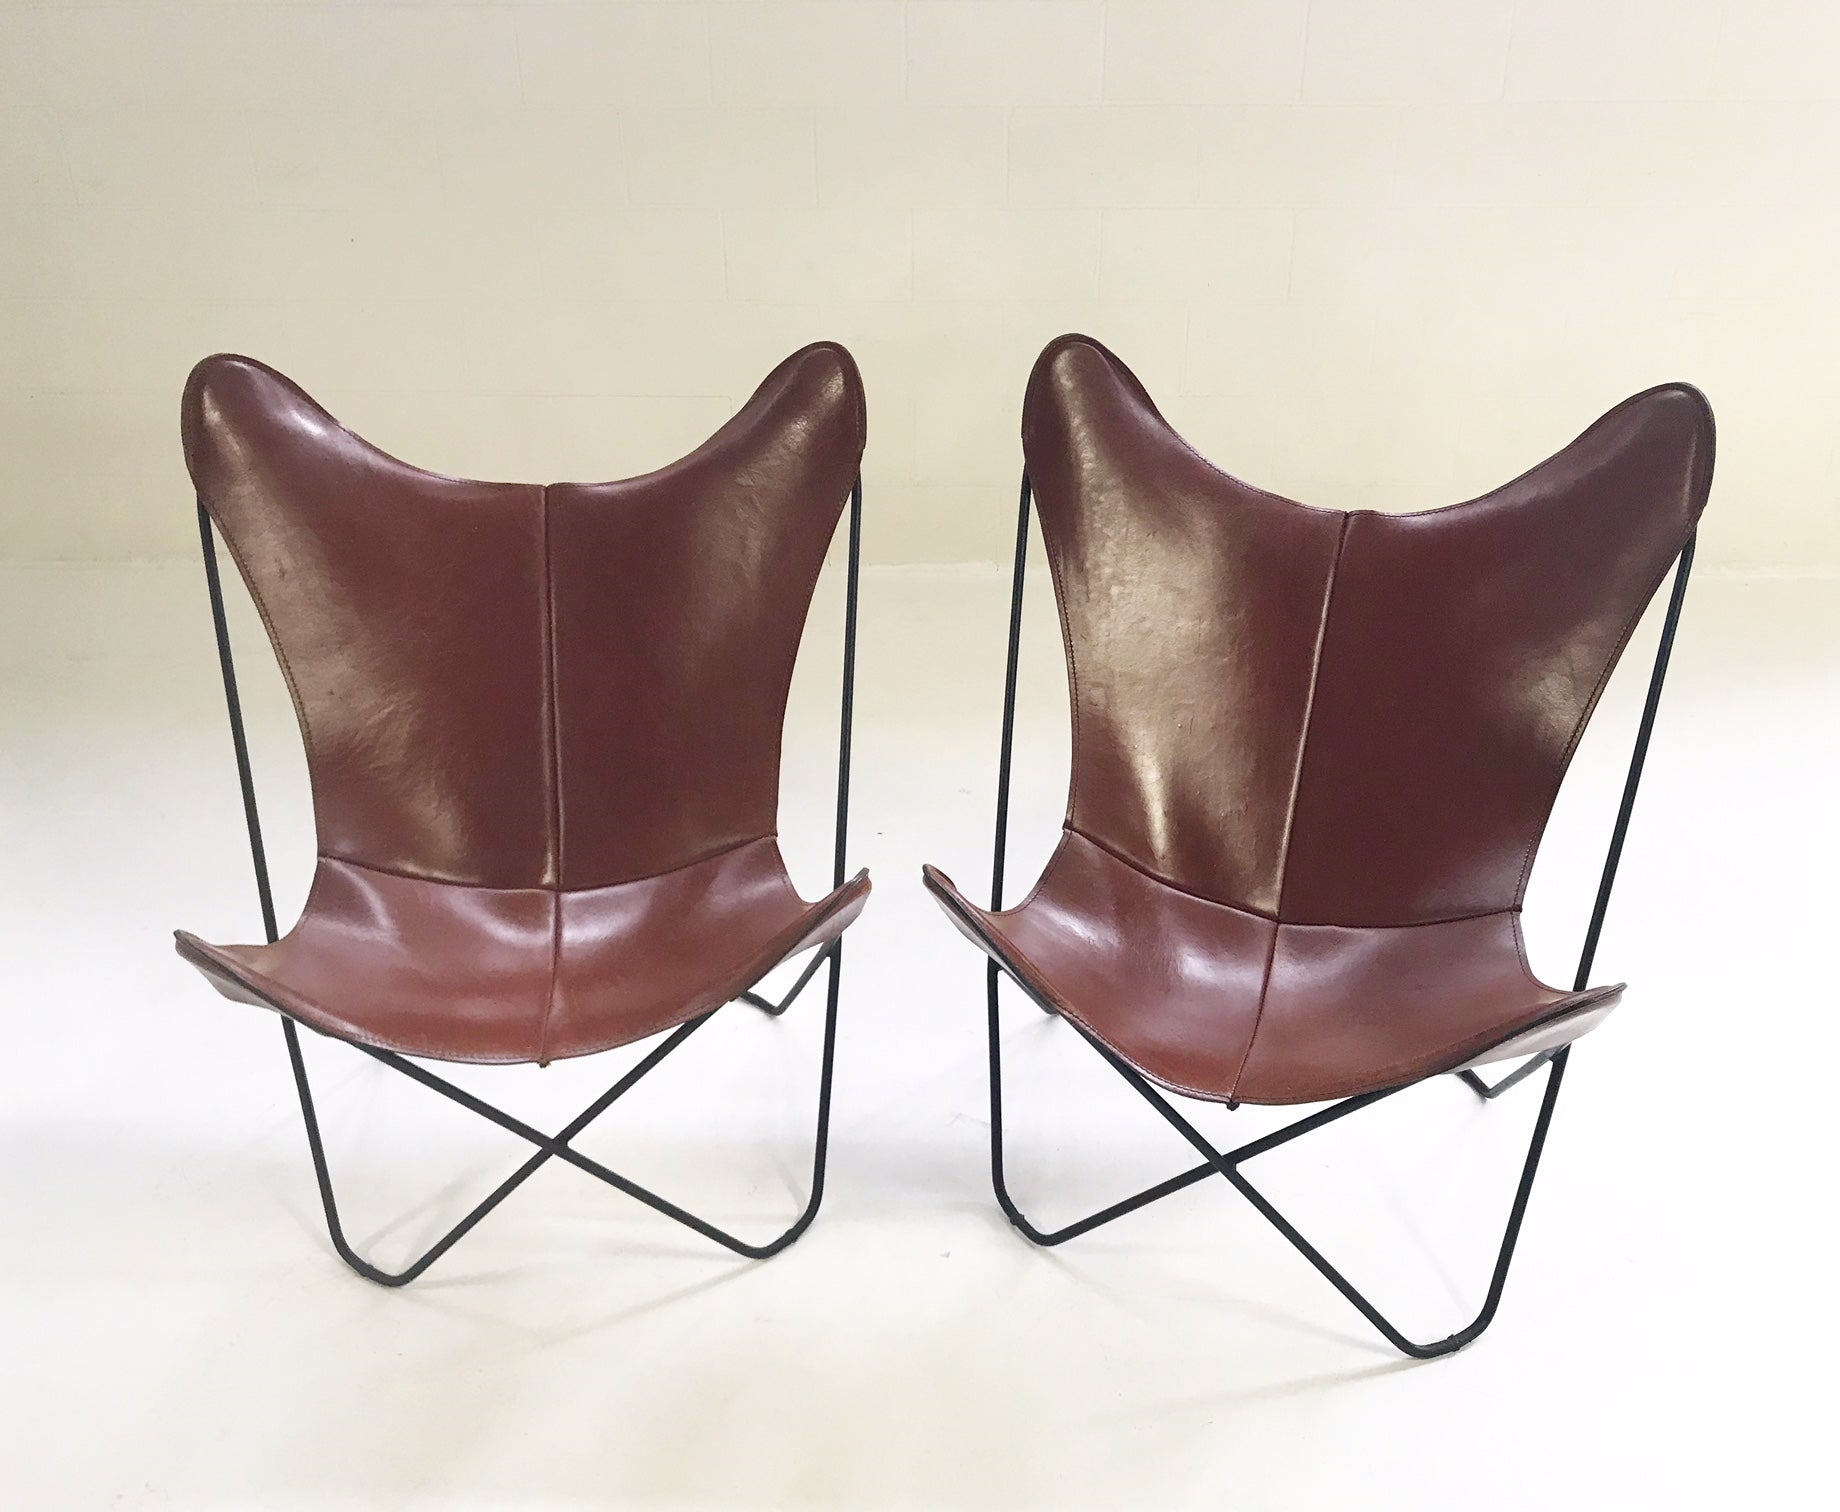 Butterfly Chairs with Sheepskins, pair - FORSYTH